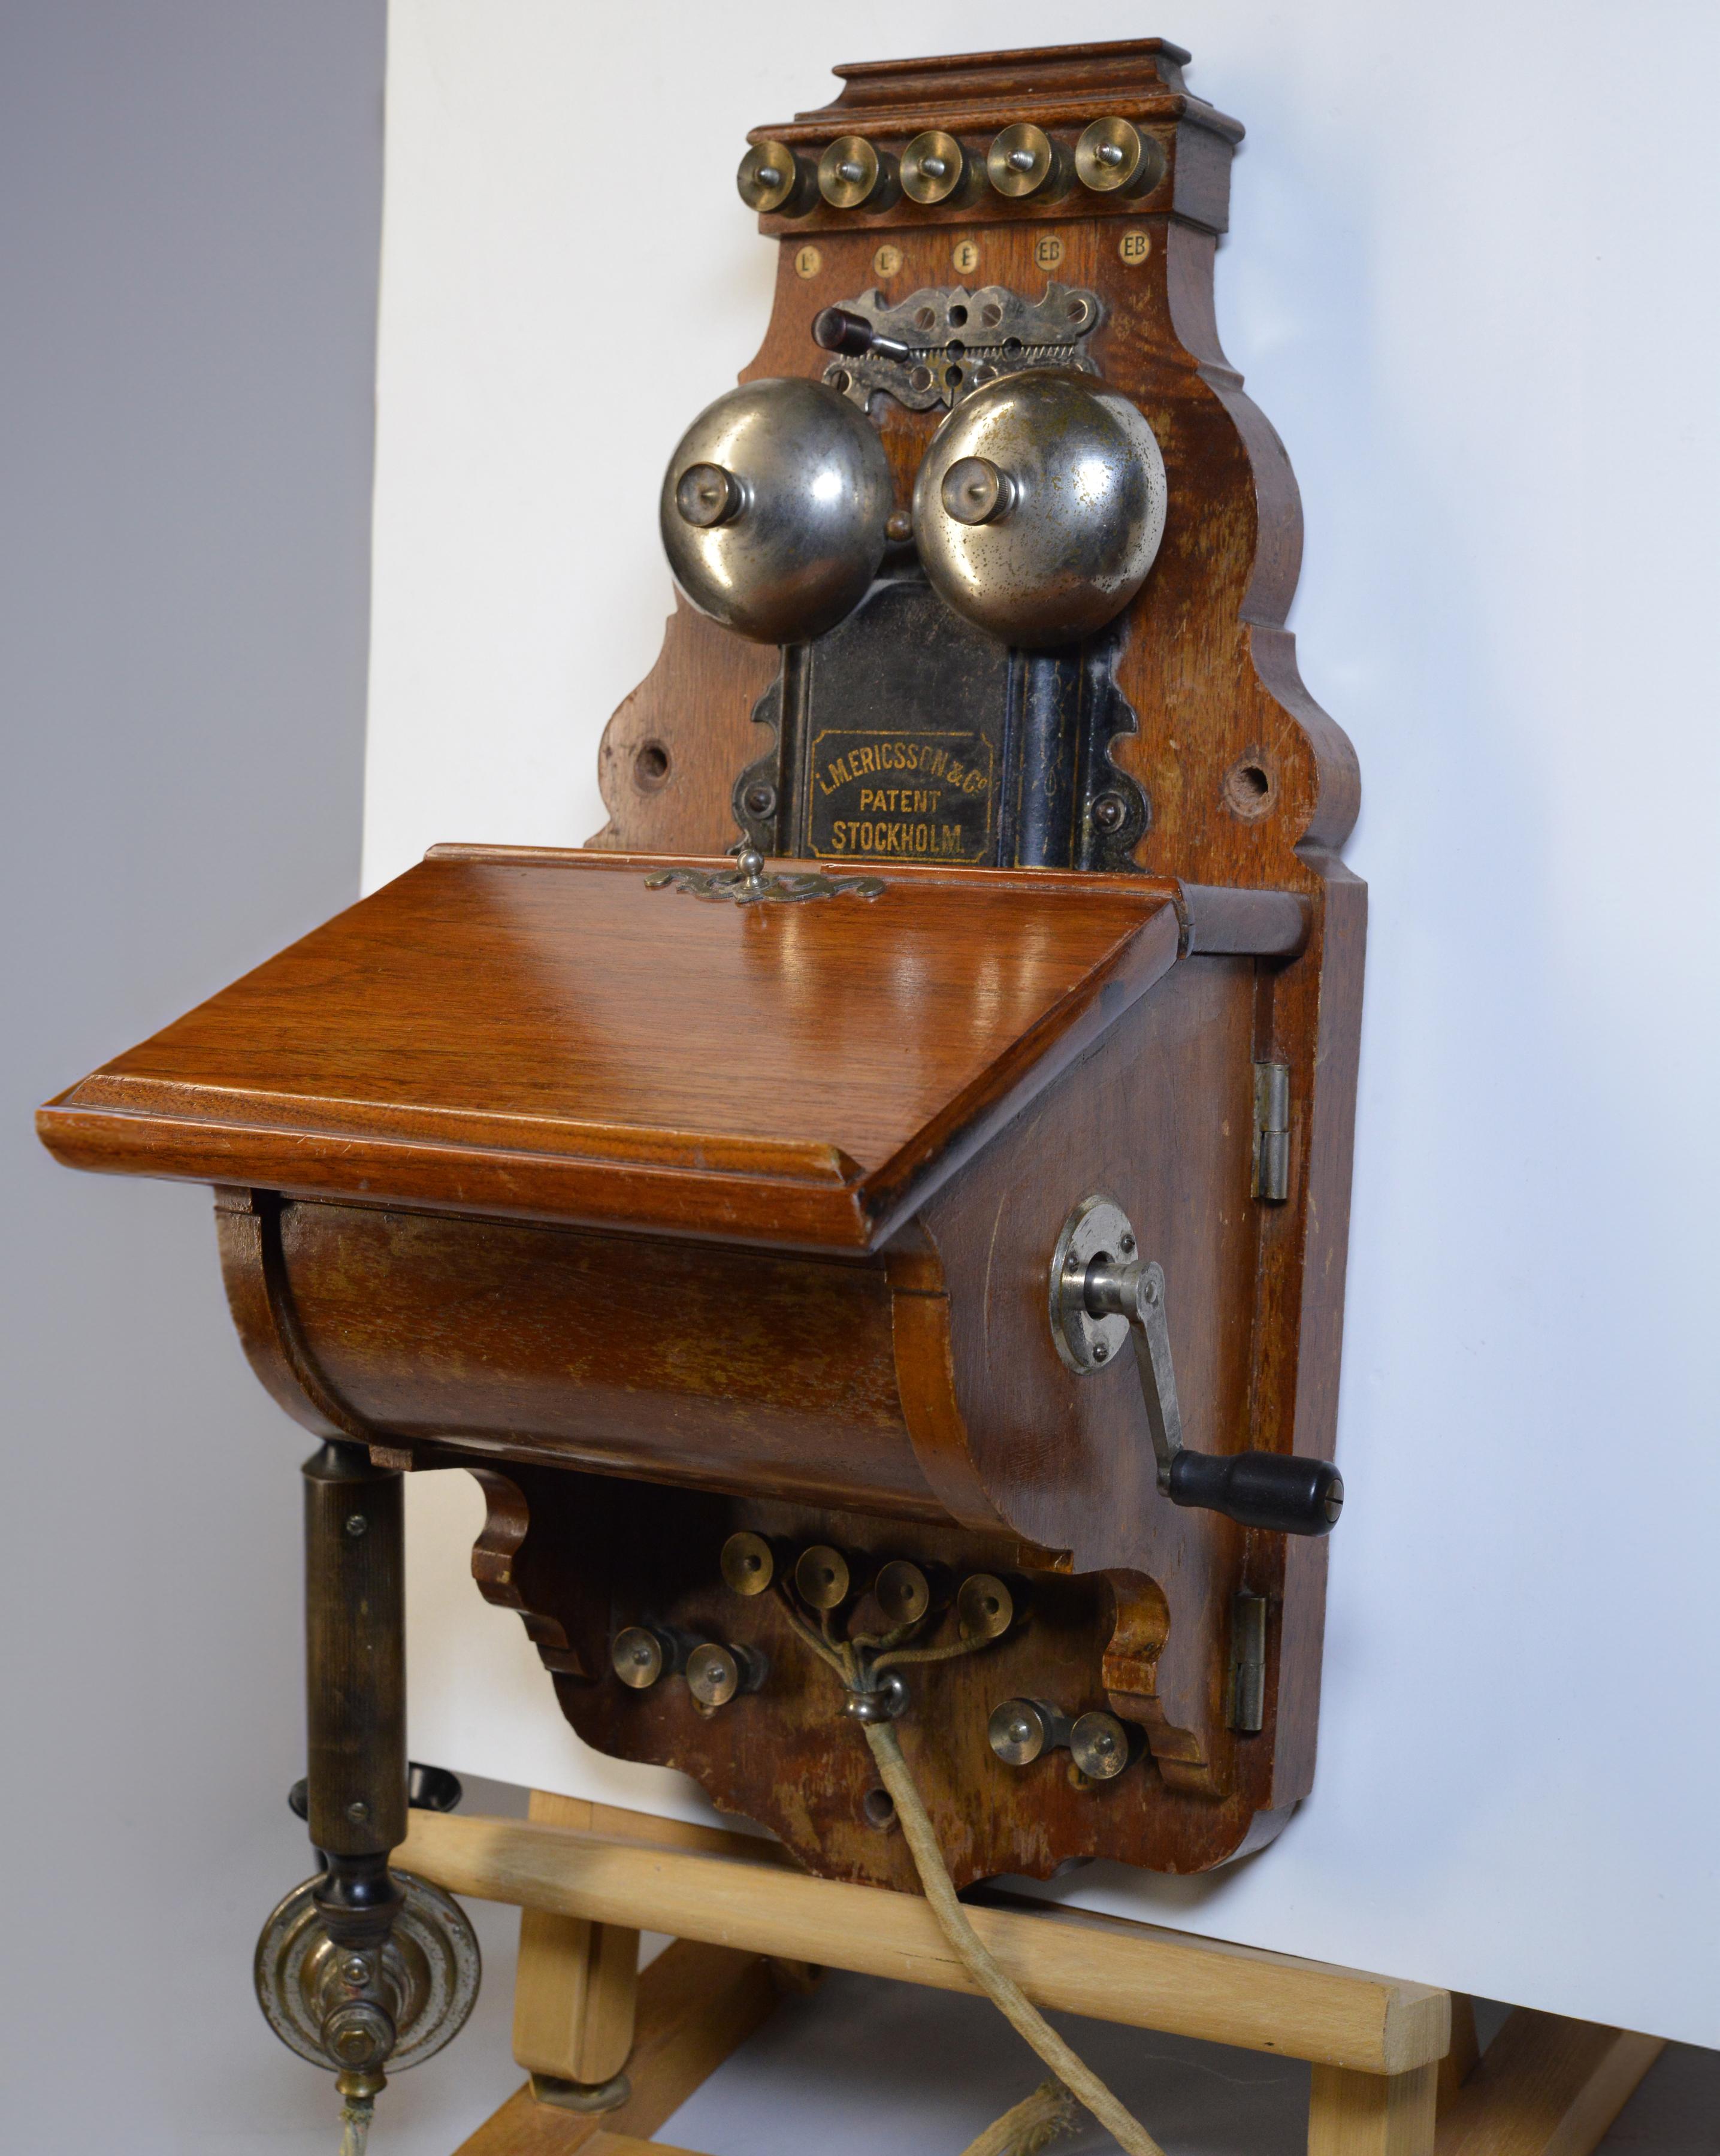 Household phone model AB130, advanced version of AB316, made ca 1912 by L.M.Ericsson & Co, Stockholm. 
Size app.: 46 cm (18”) high, 25 cm (9.8”) wide and 23 cm (9.1) deep. Very good, age n usage wear, losses to finish of case. Please study high-res